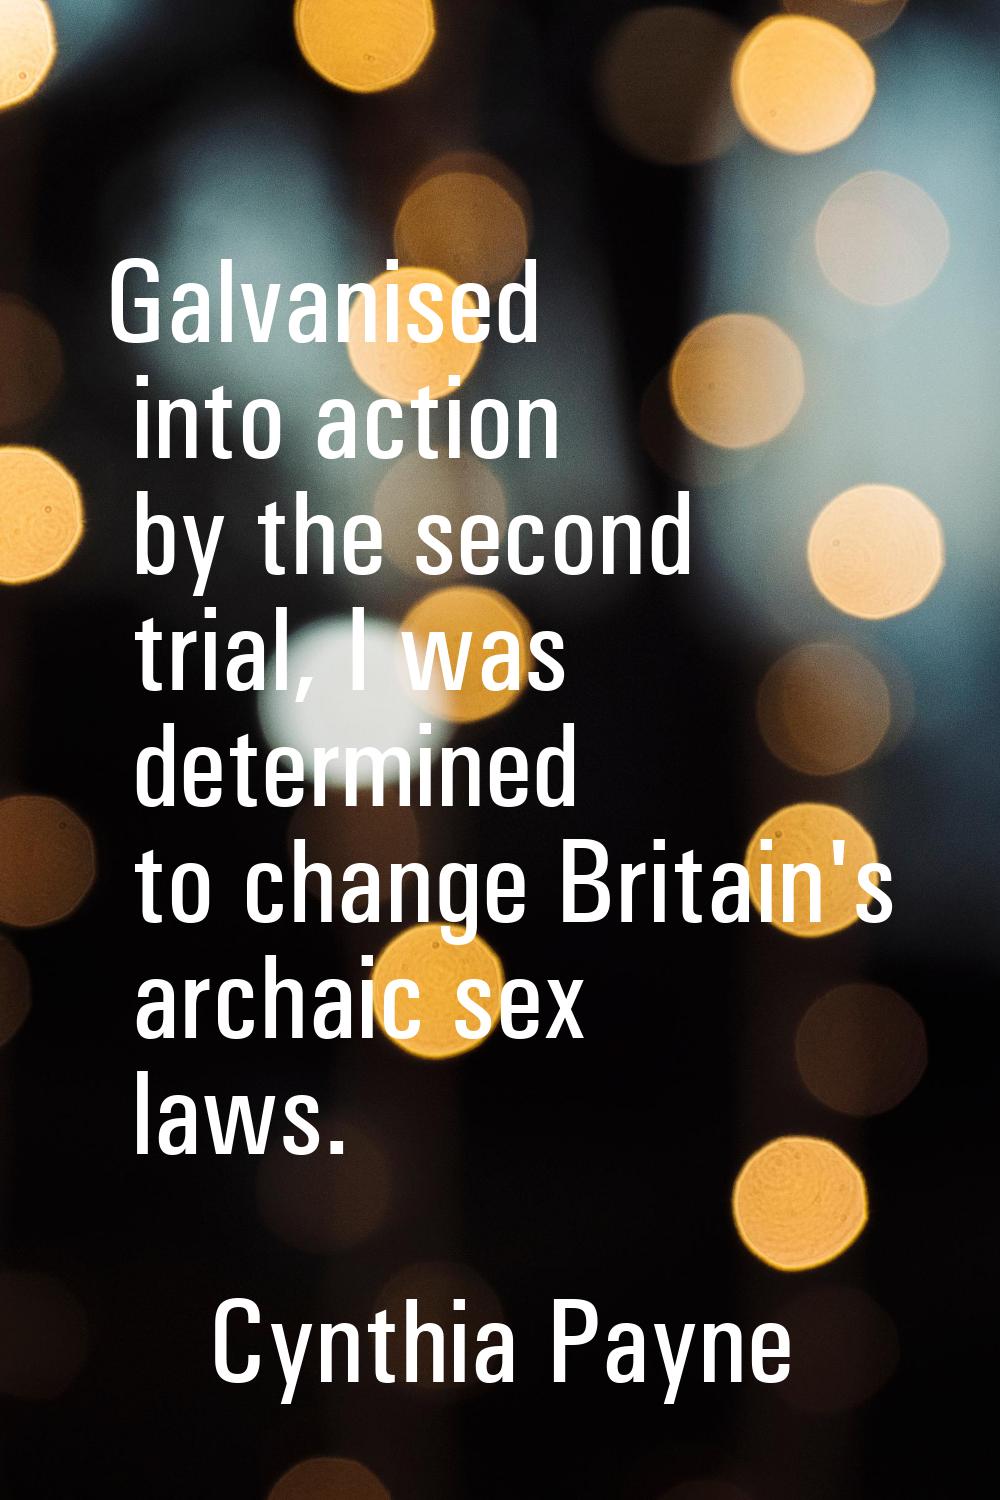 Galvanised into action by the second trial, I was determined to change Britain's archaic sex laws.